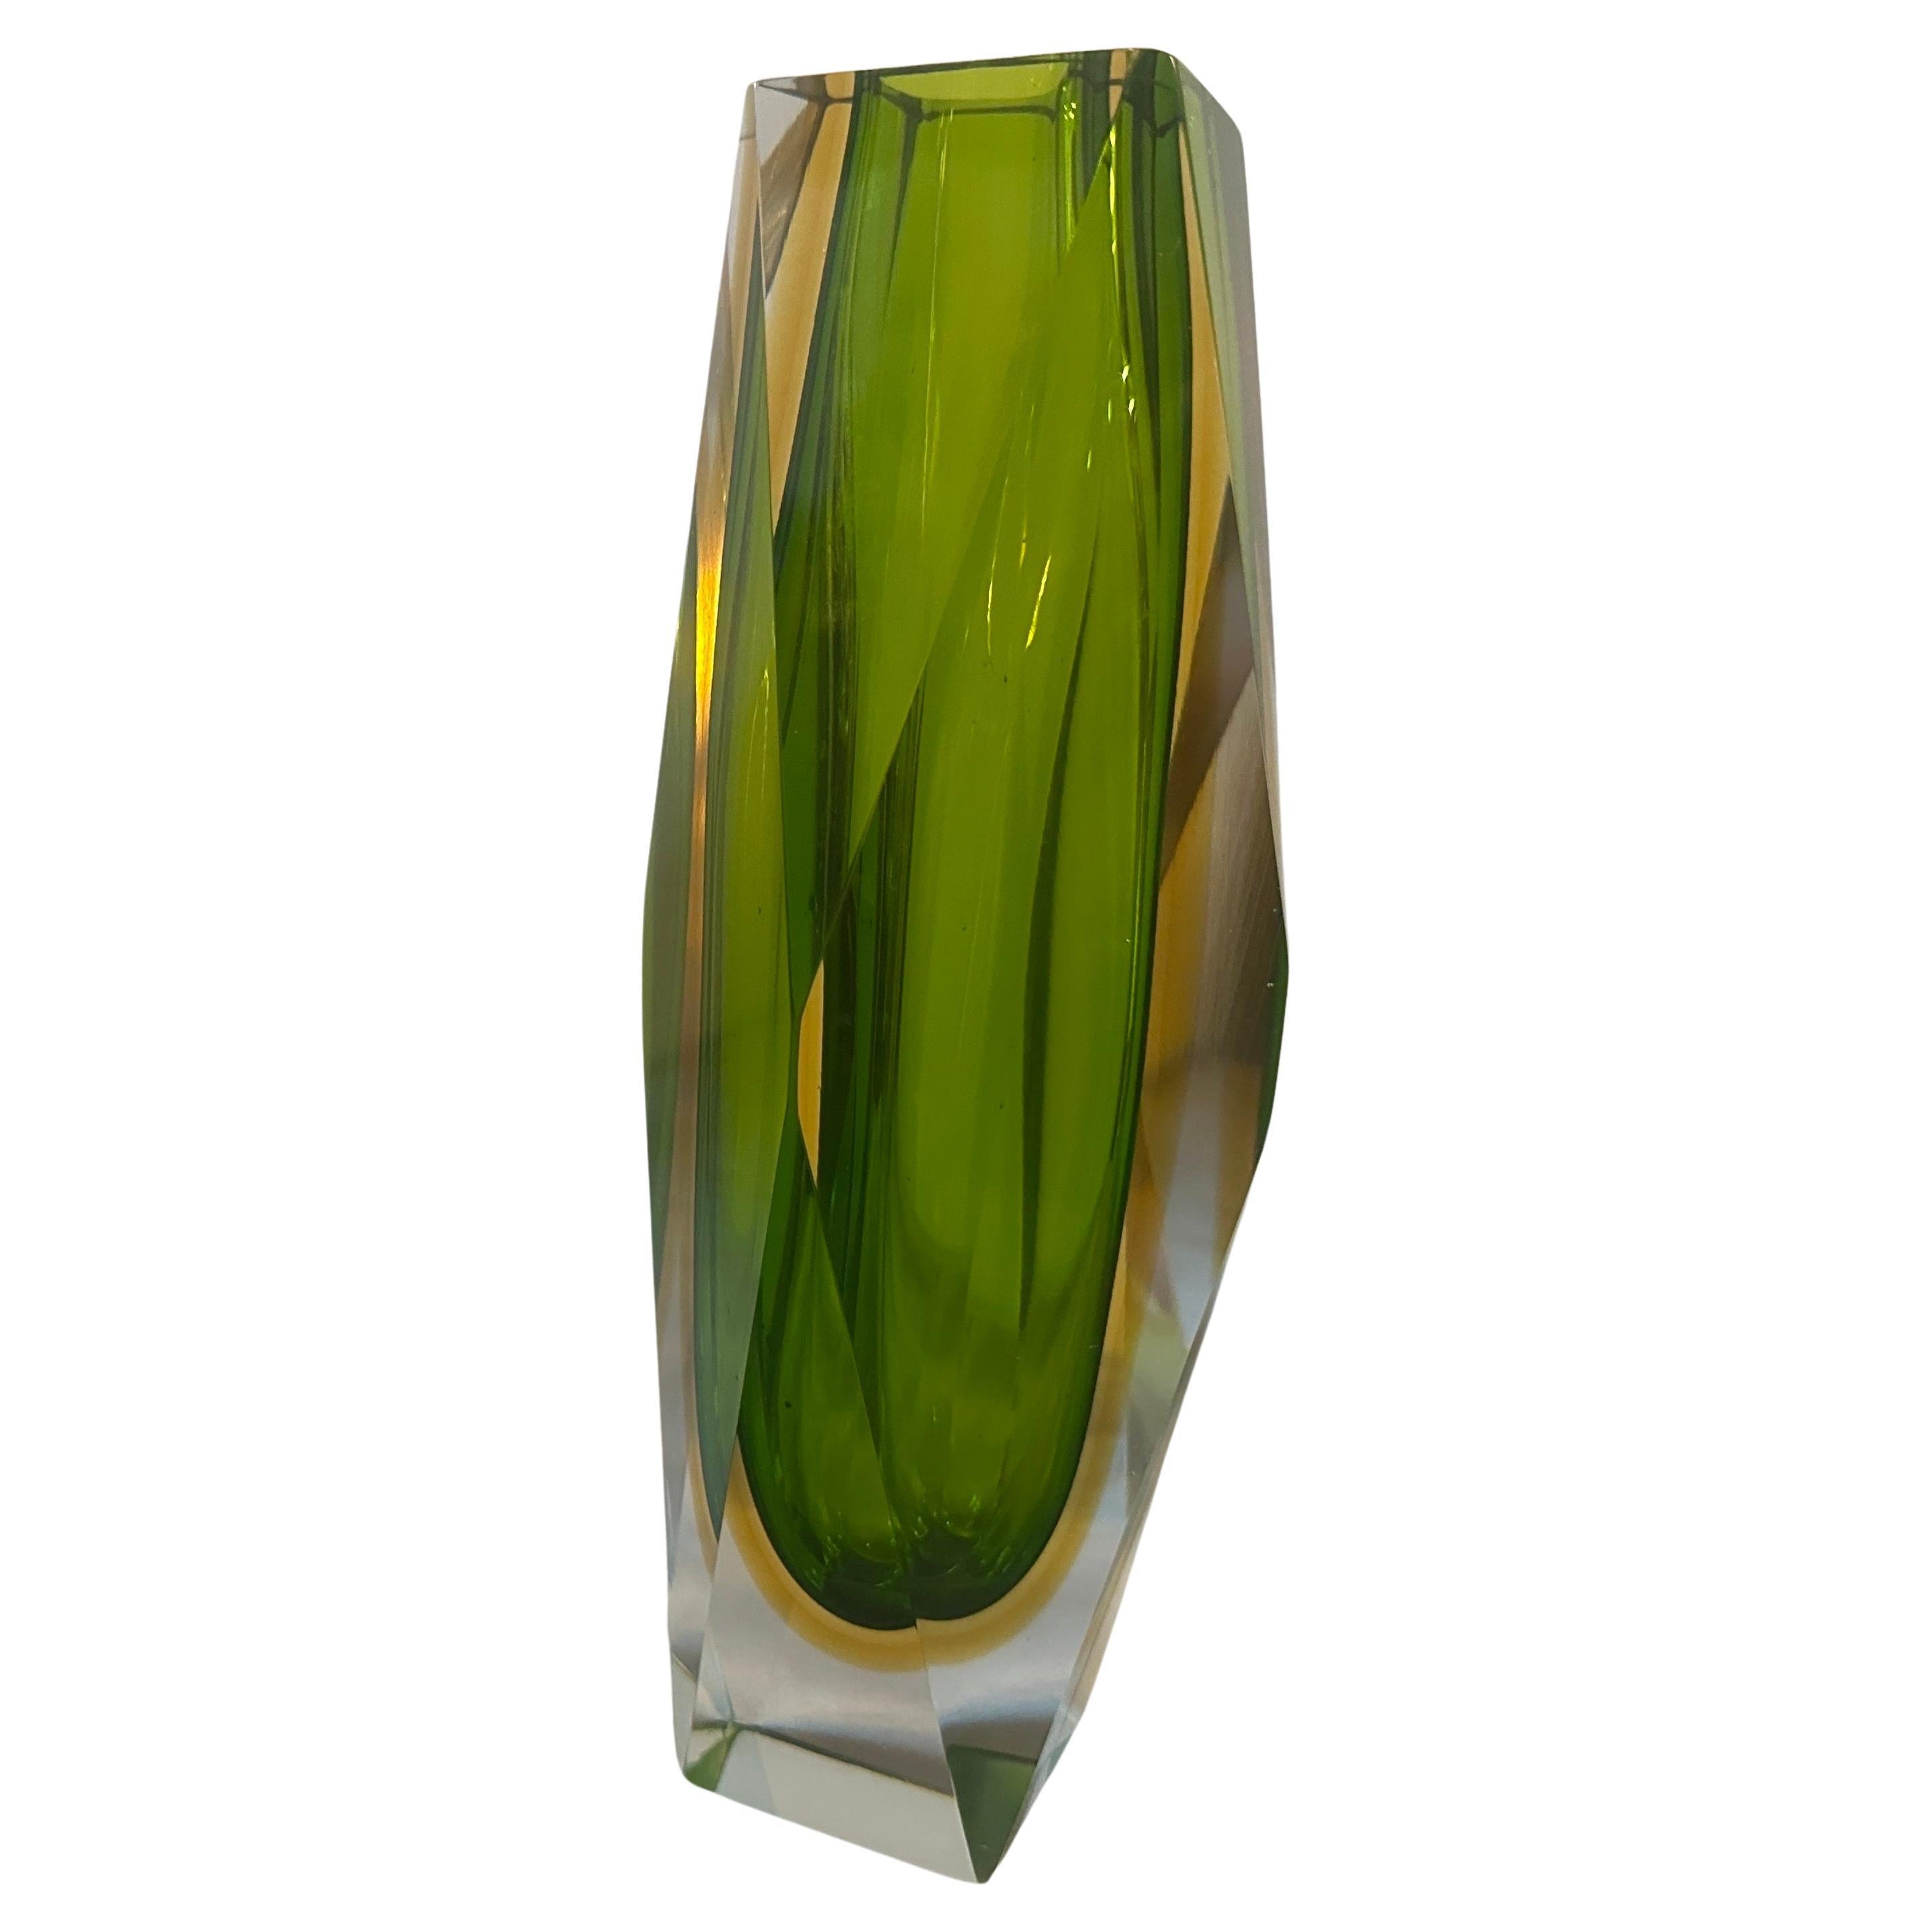 A perfect condition vase designed and manufactured in Venice by Seguso in the Sixties. This Murano glass vase is a vintage decorative piece that represents the distinct craftsmanship and design style of Murano glass from that era. Murano glass is